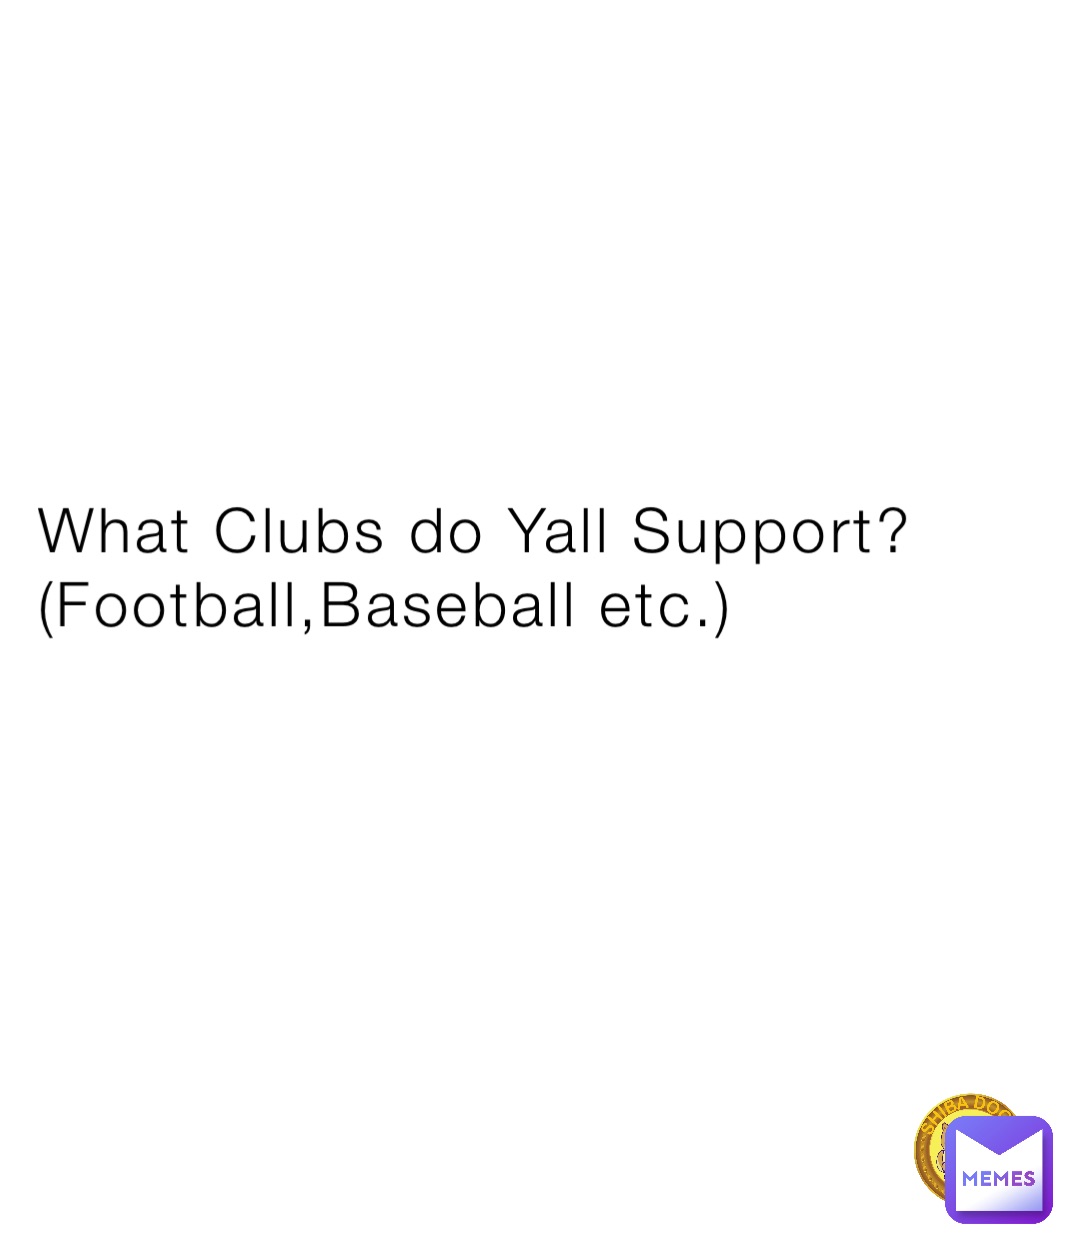 What Clubs do Yall Support?
(Football,Baseball etc.)